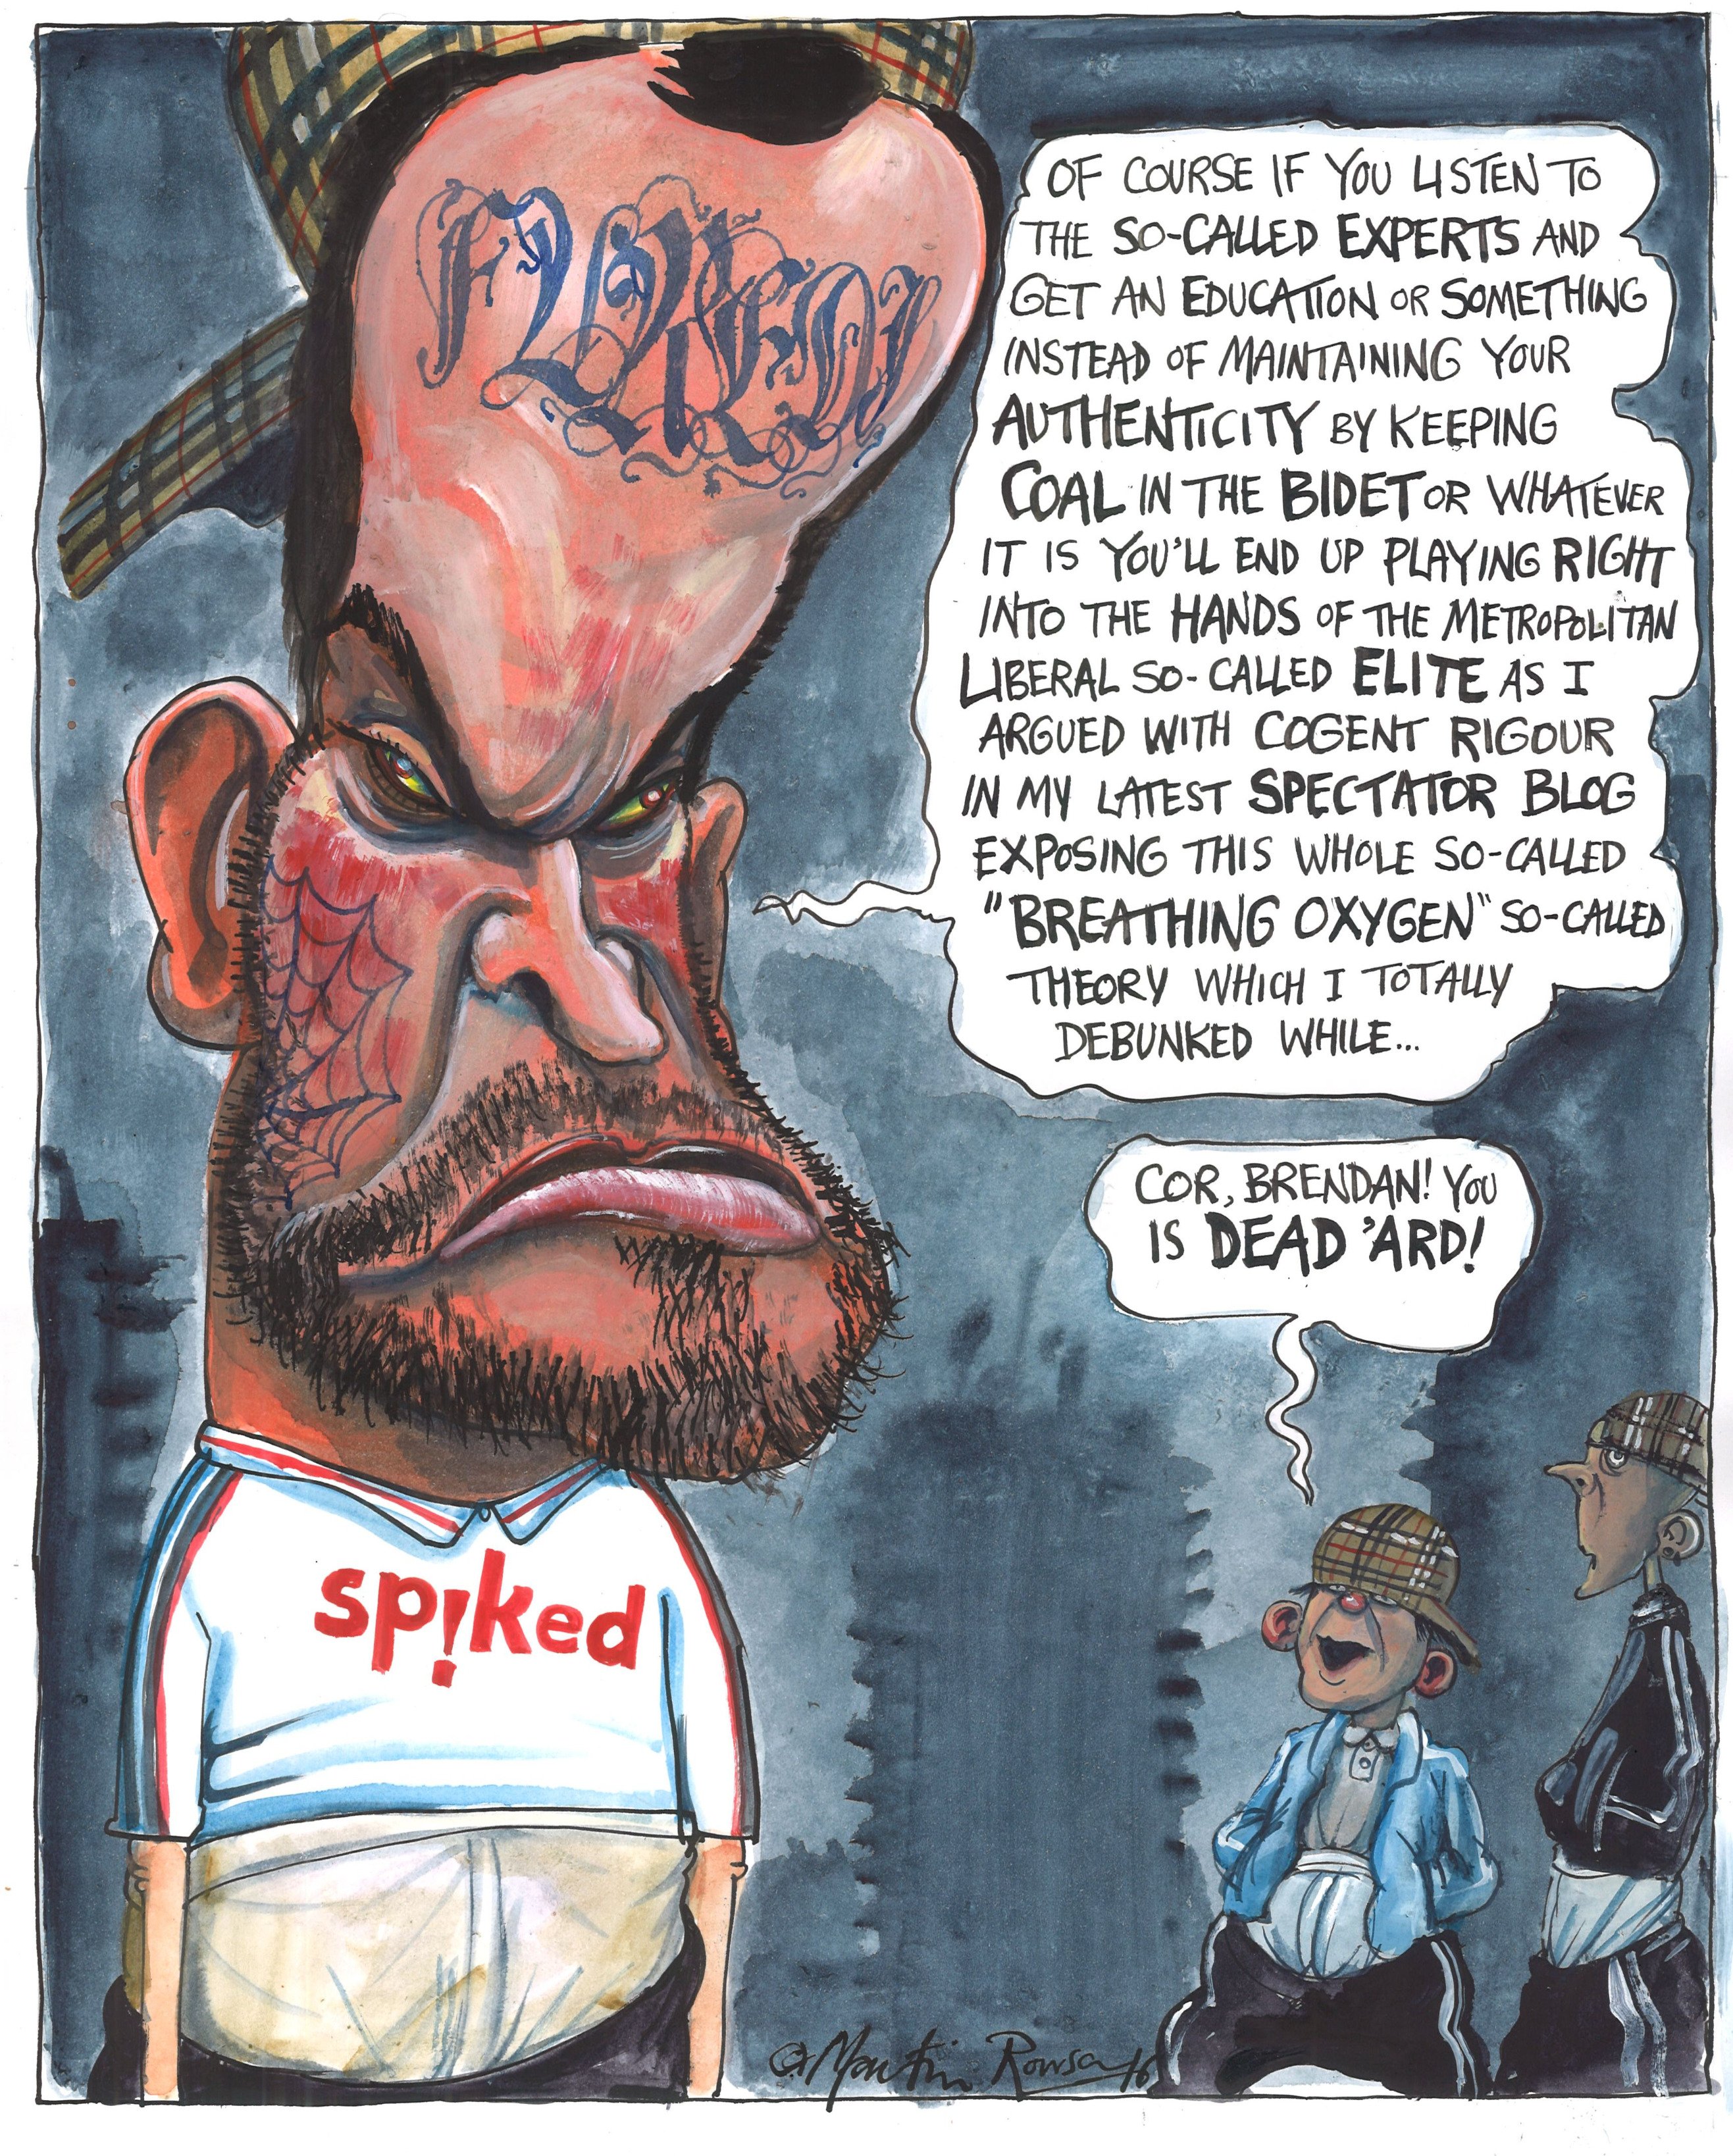 Martin Rowson on Twitter: "...I posted a tweet about Brendan O'Neill  WITHOUT including this cartoon from @littleatoms. My only excuse is that I  included comments about Toby Young in the same tweet